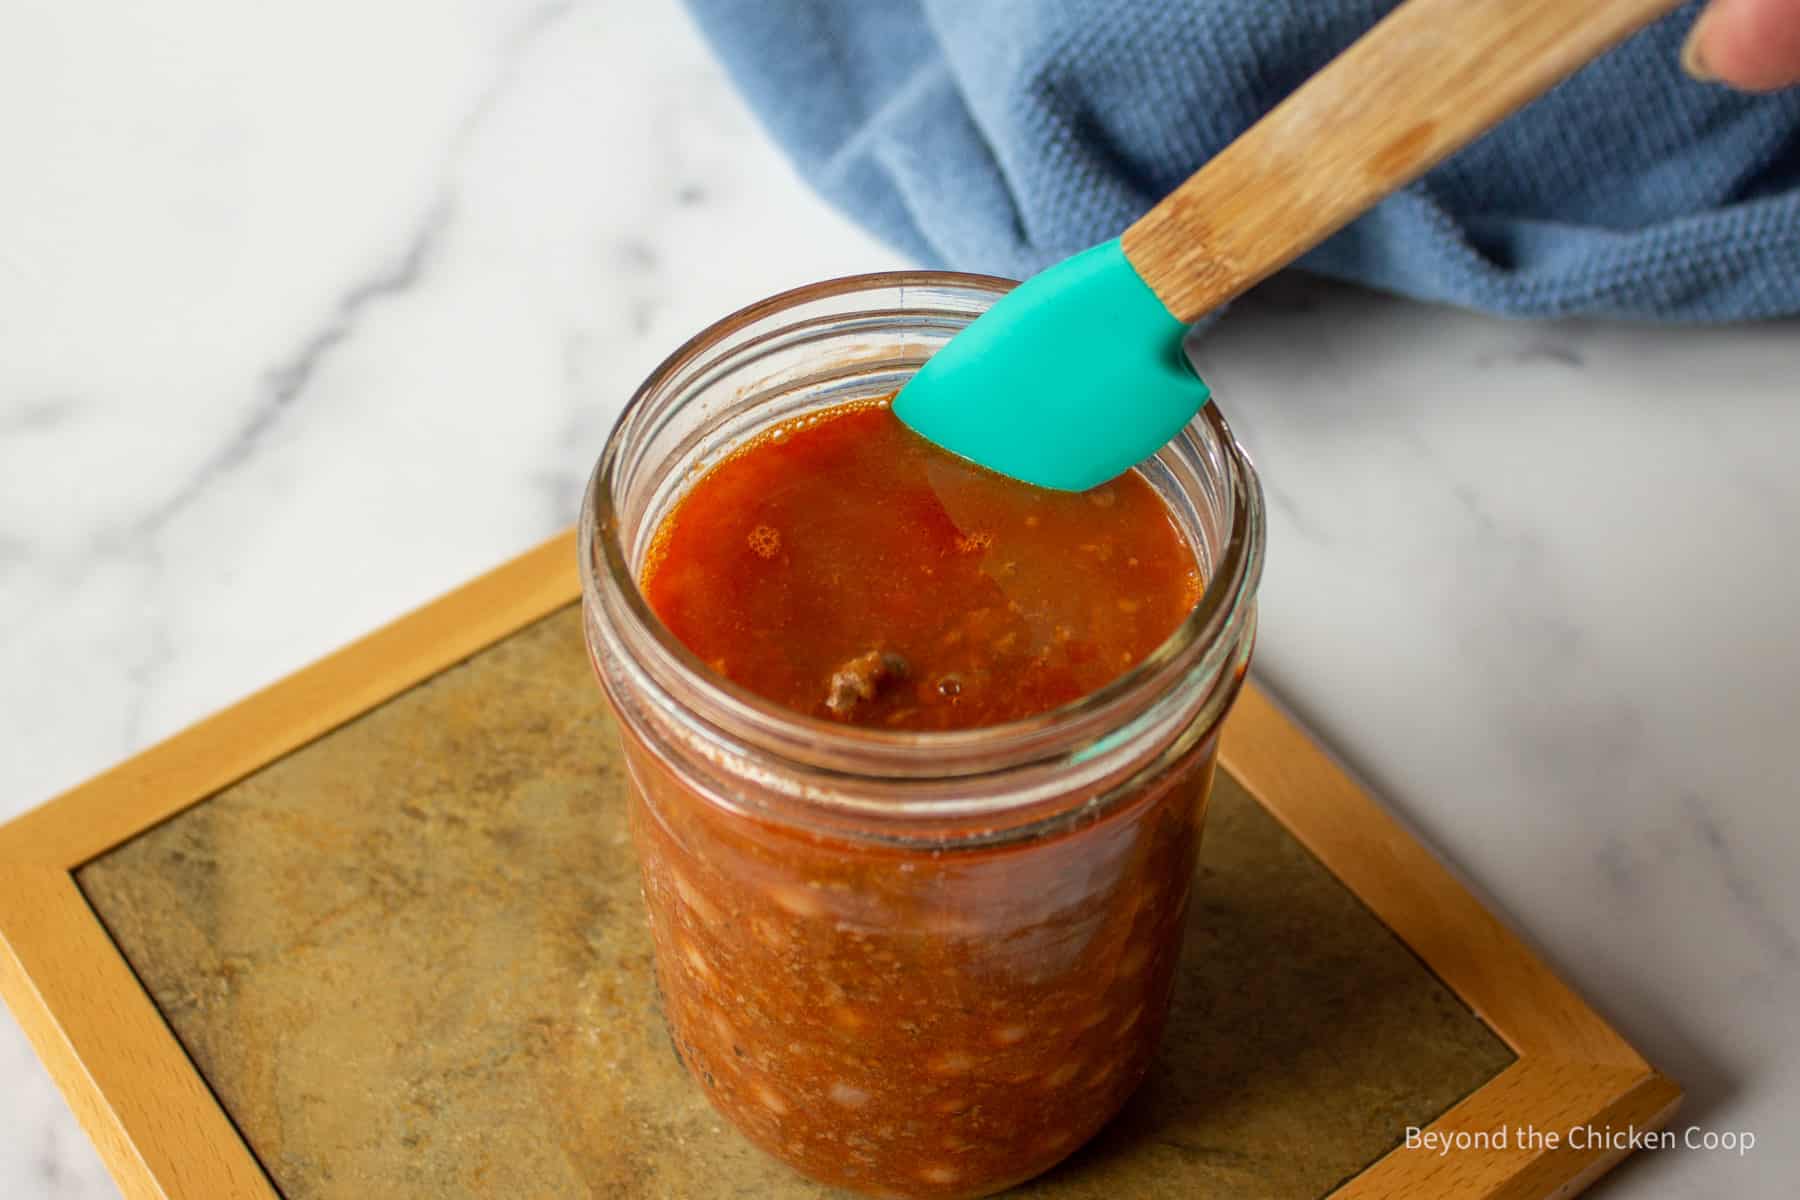 Removing air bubbles from a jar of chili.